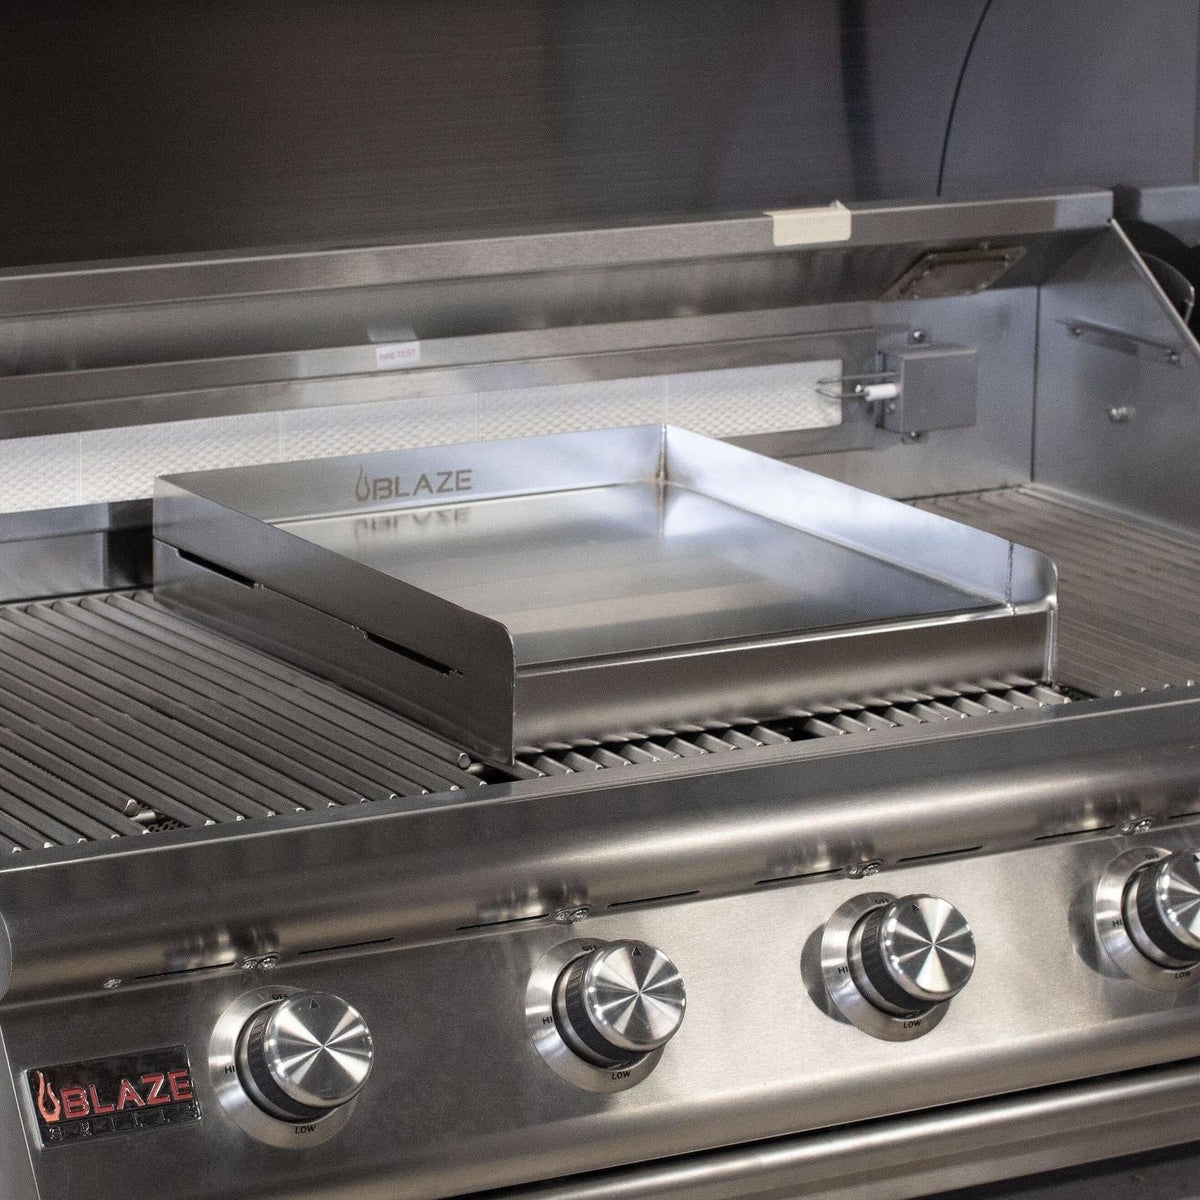 Blaze 14 Inch Griddle Plate Shown on Grill